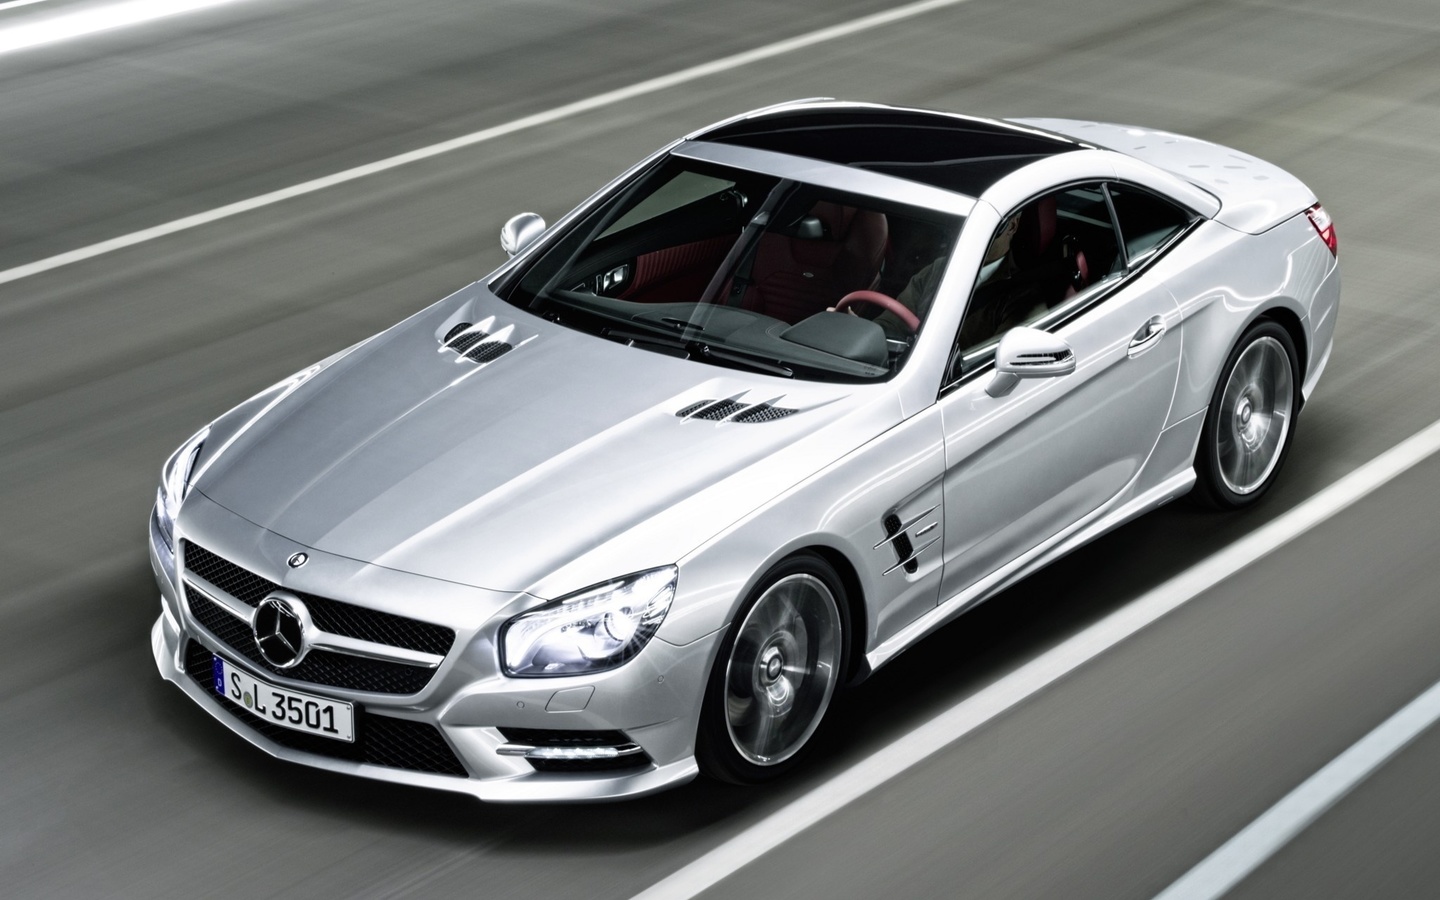 sl350, Mercedes, , amg, 2012, benz, package, , sports, 